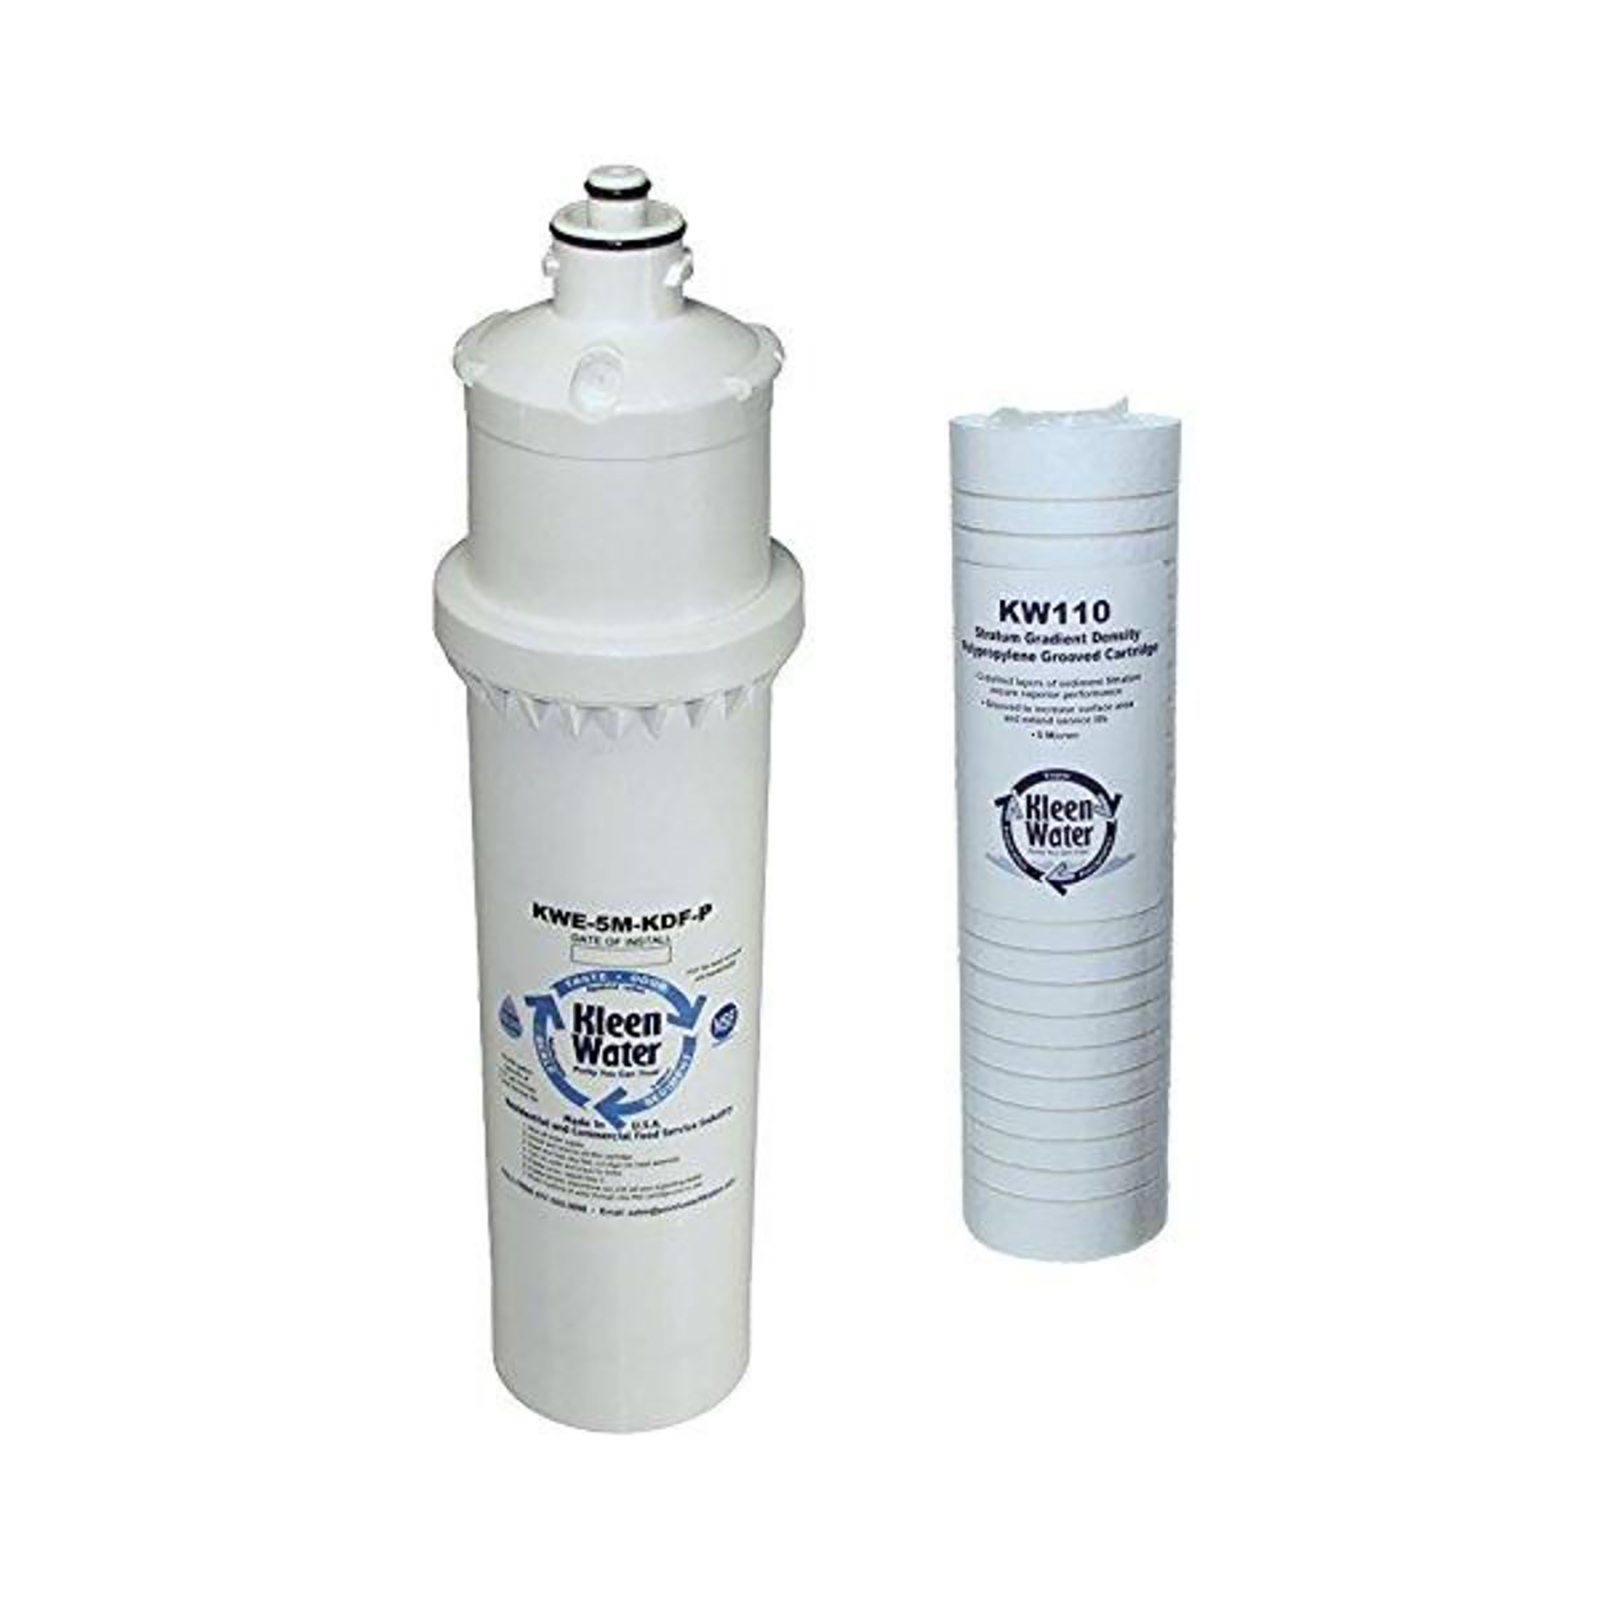 KleenWater GLAB00Q3AP0J2 Follet Ice Machine 00978957 2pc. Compatible Replacement Water Filter Kit